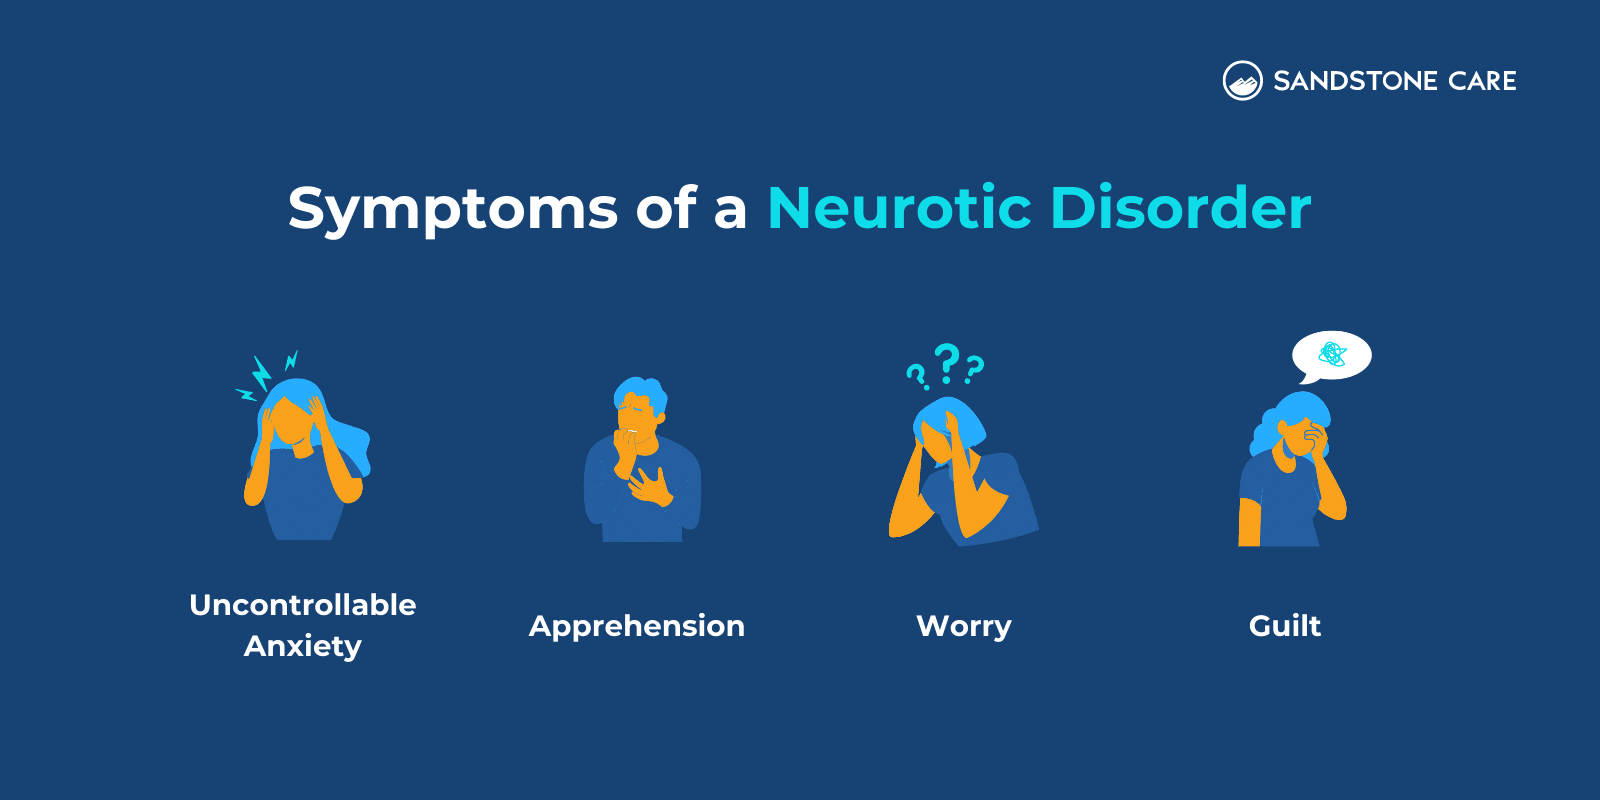 Symptoms Of A Neurotic Disorder written above the list of symptoms represented with relevant illustrations: Uncontrollable anxiety, apprehension, worry, and guilt